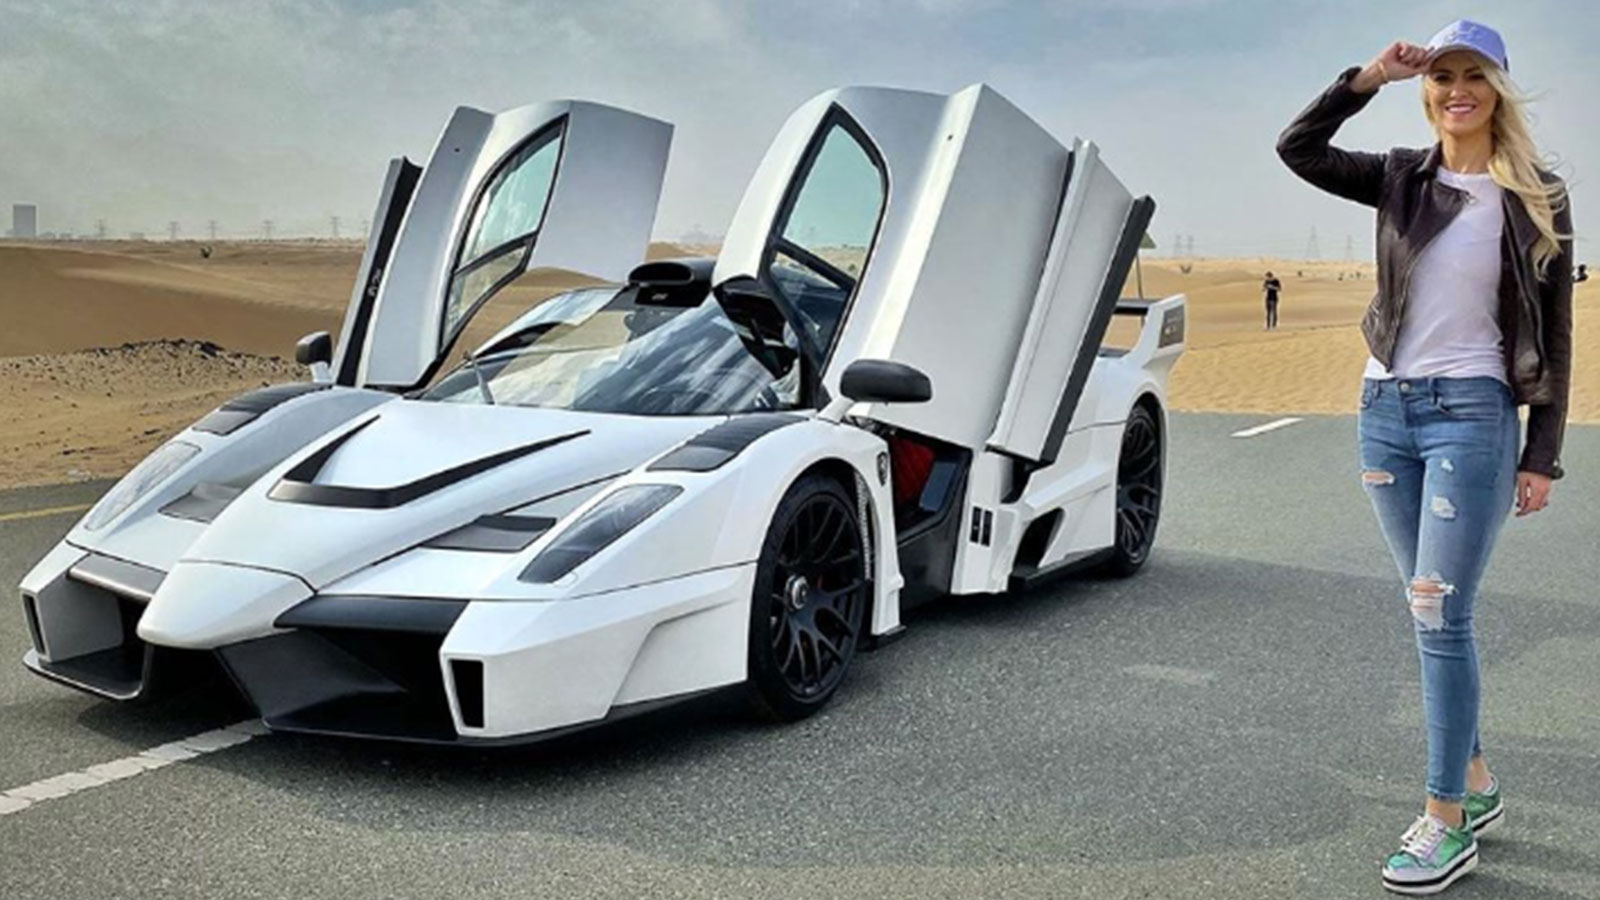 Supercar Blondie stunned by “one of a kind” $10 million Ferrari 